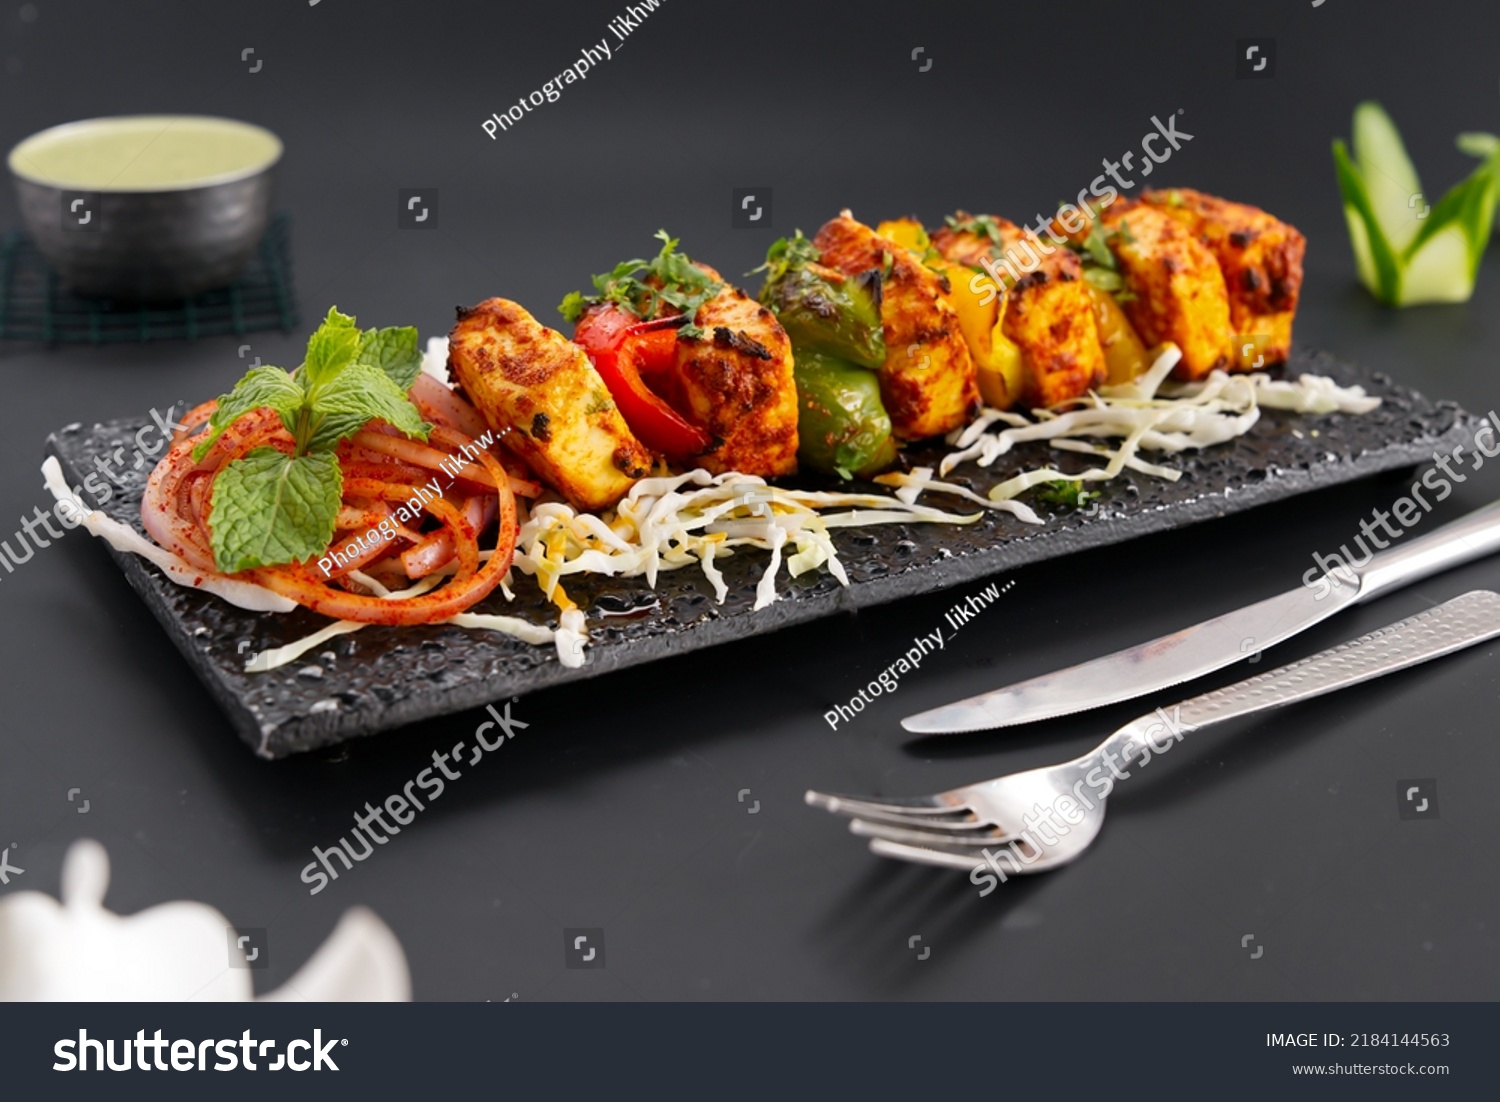 Paneer Tikka is popular Indian appetizer made with cubes of paneer and veggies marinated with yogurt and spices #2184144563